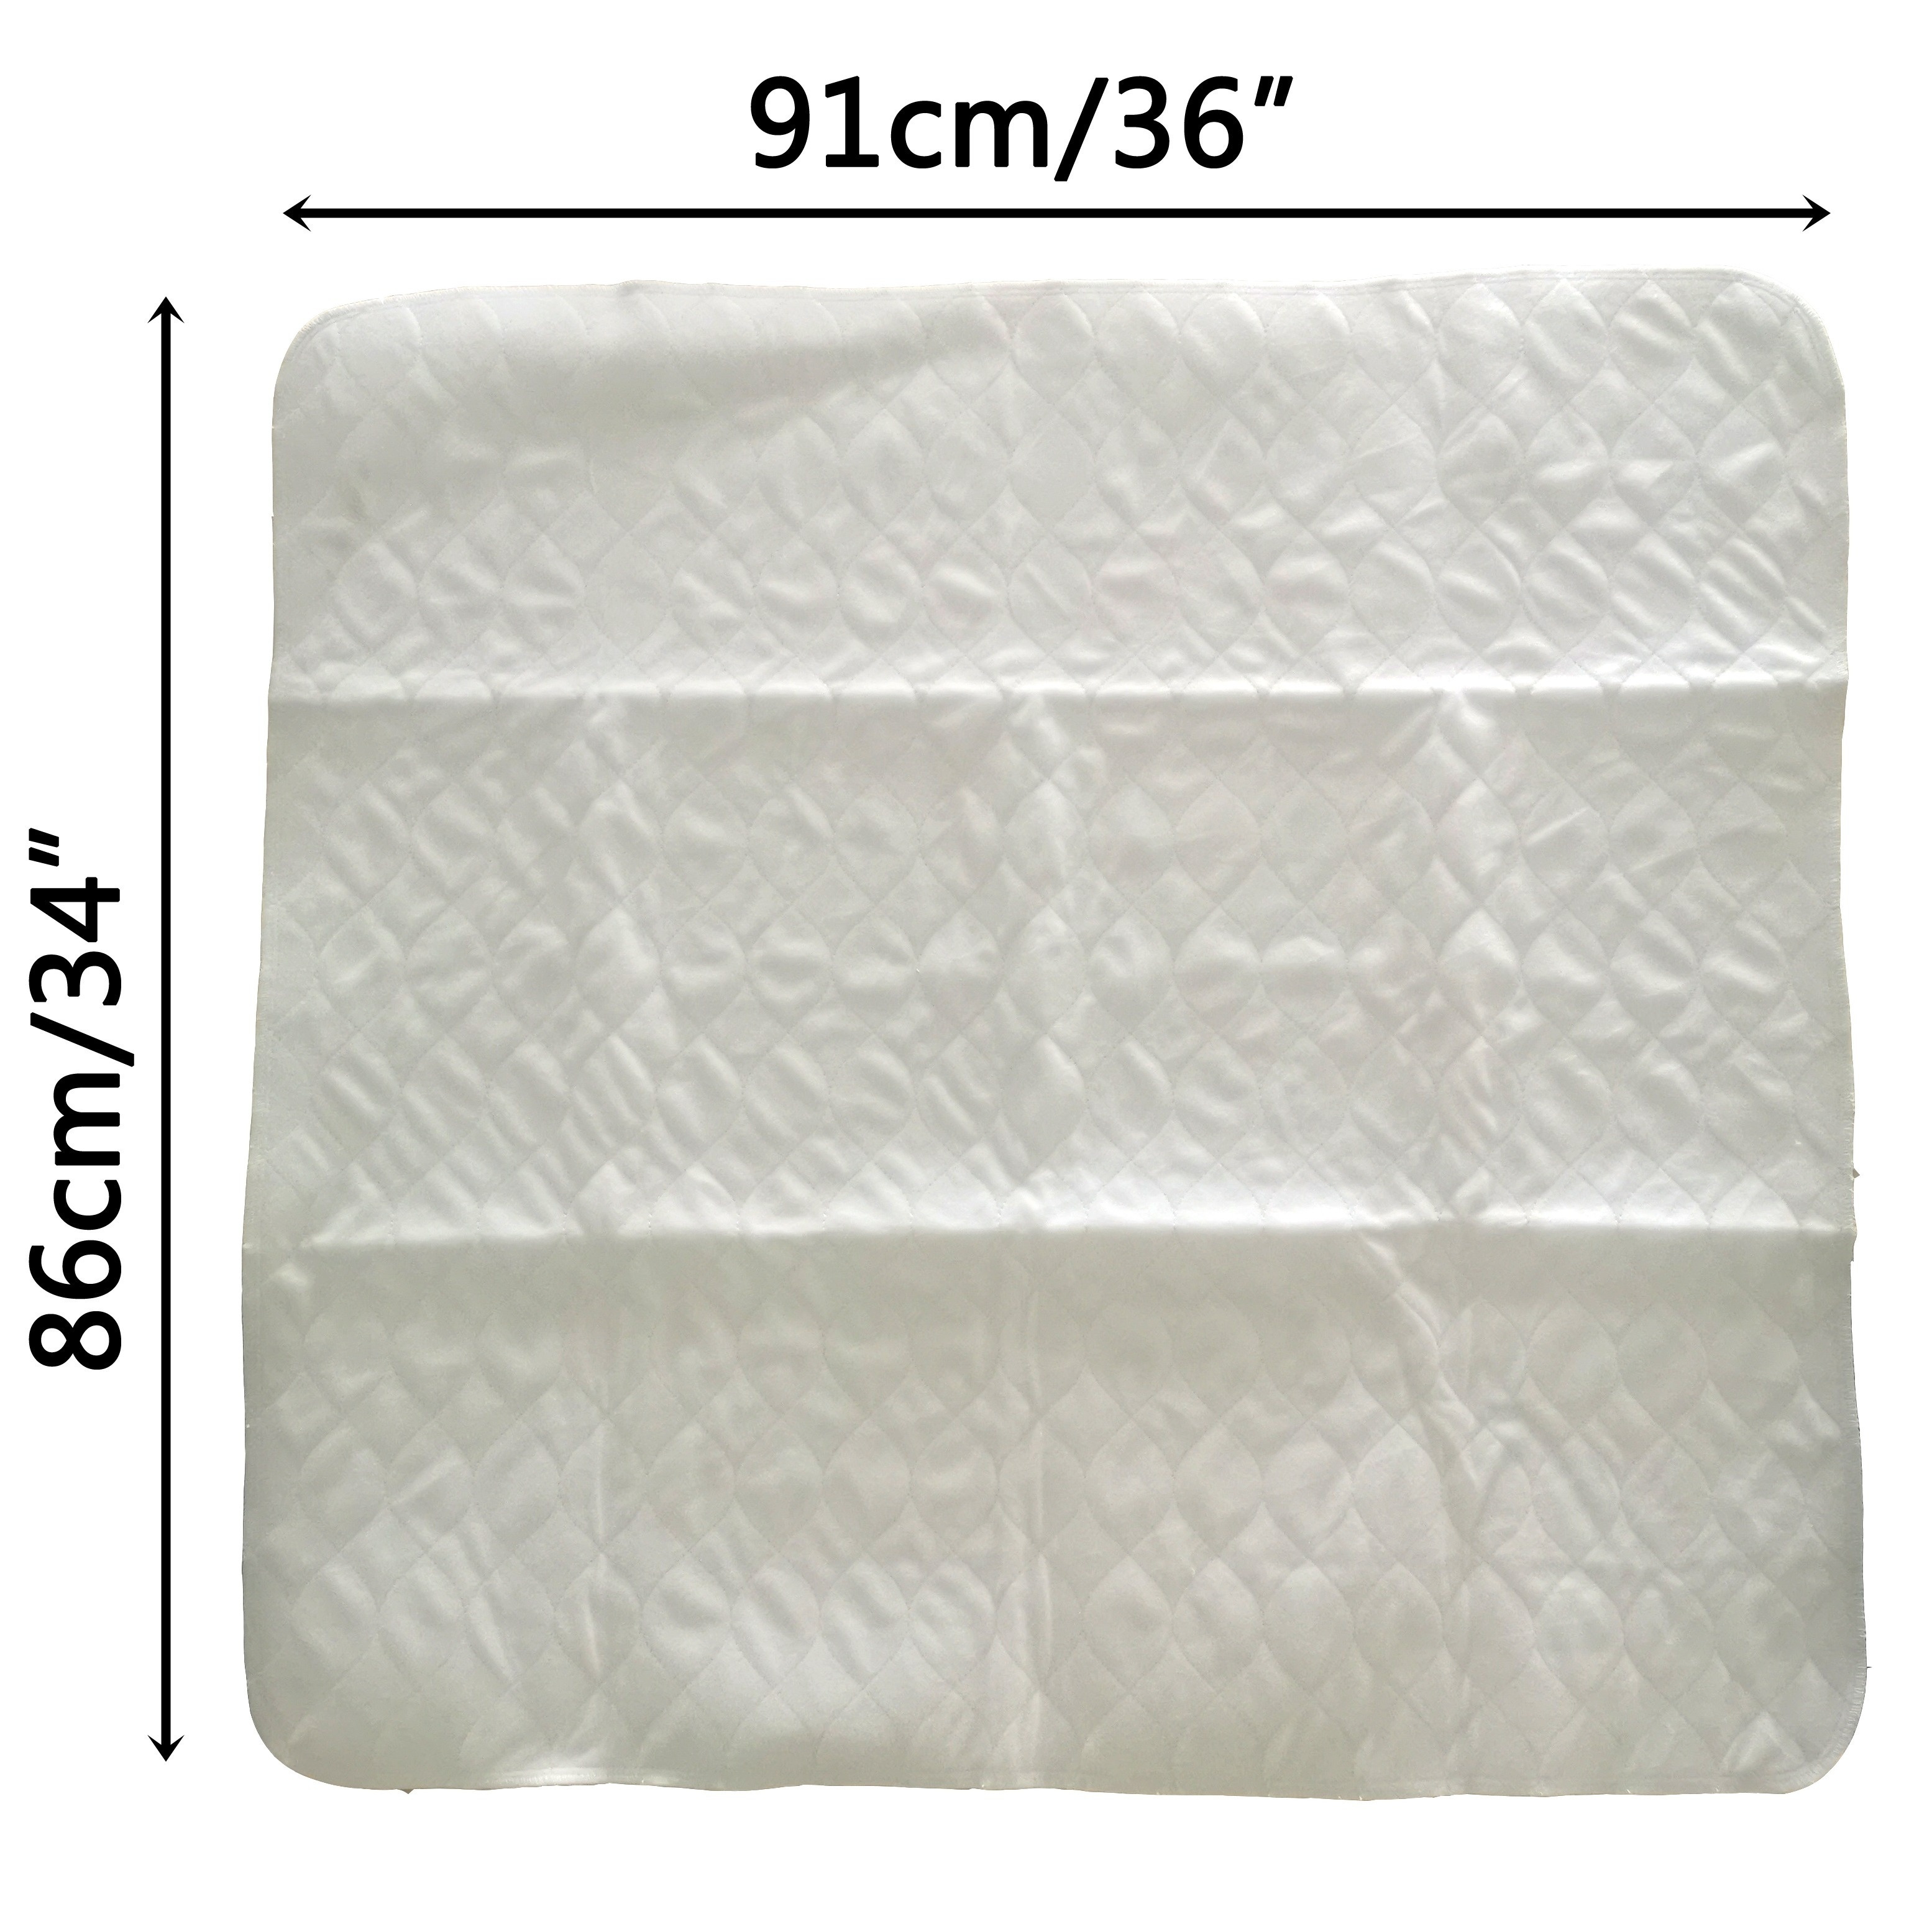 4pcs Washable Underpads Reusable Bed Pads Waterproof Incontinence